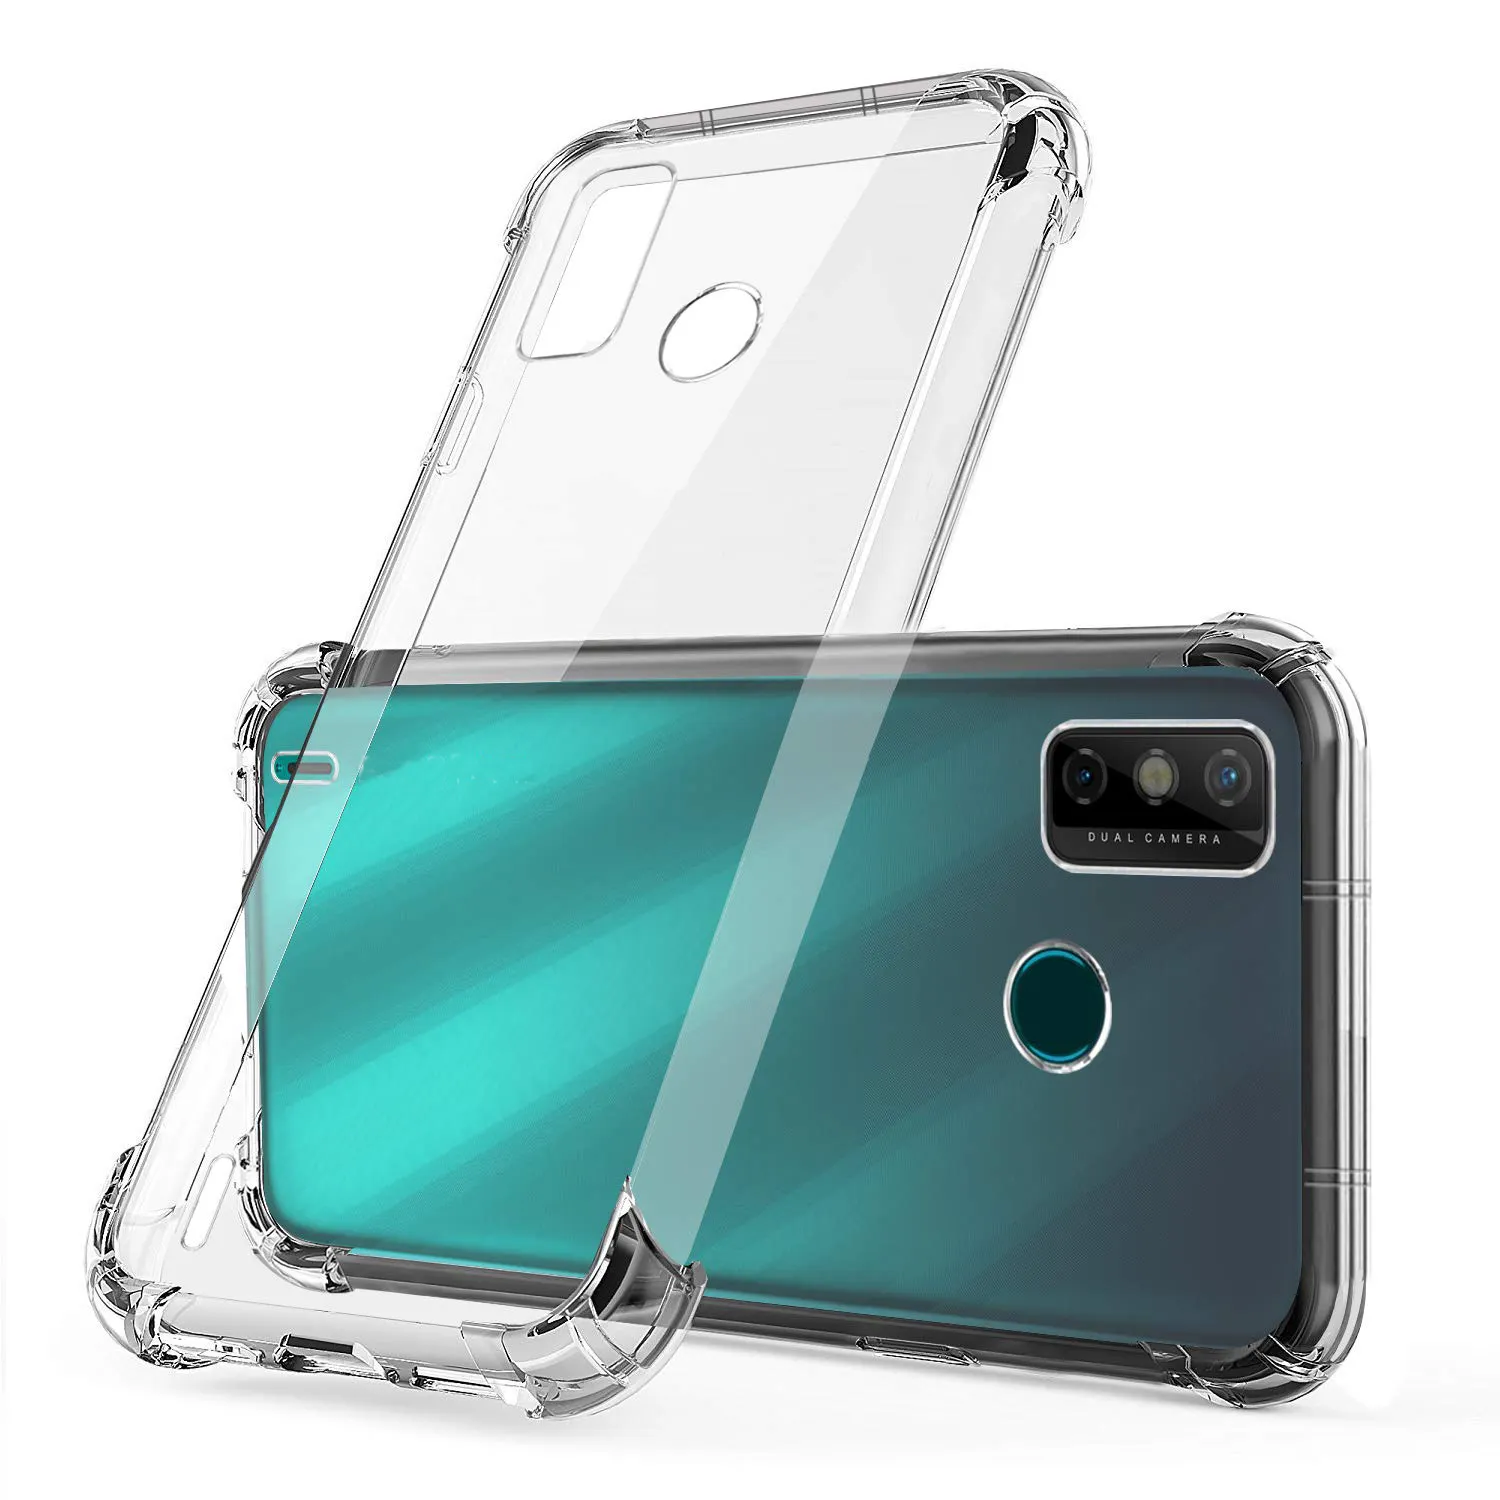 Capa transparente transparente transparente de proteção TPU Crystal Case para Itel Vision 2/S16 PRO A25 S16 A33 S13 S15 A55 P33 Silicone